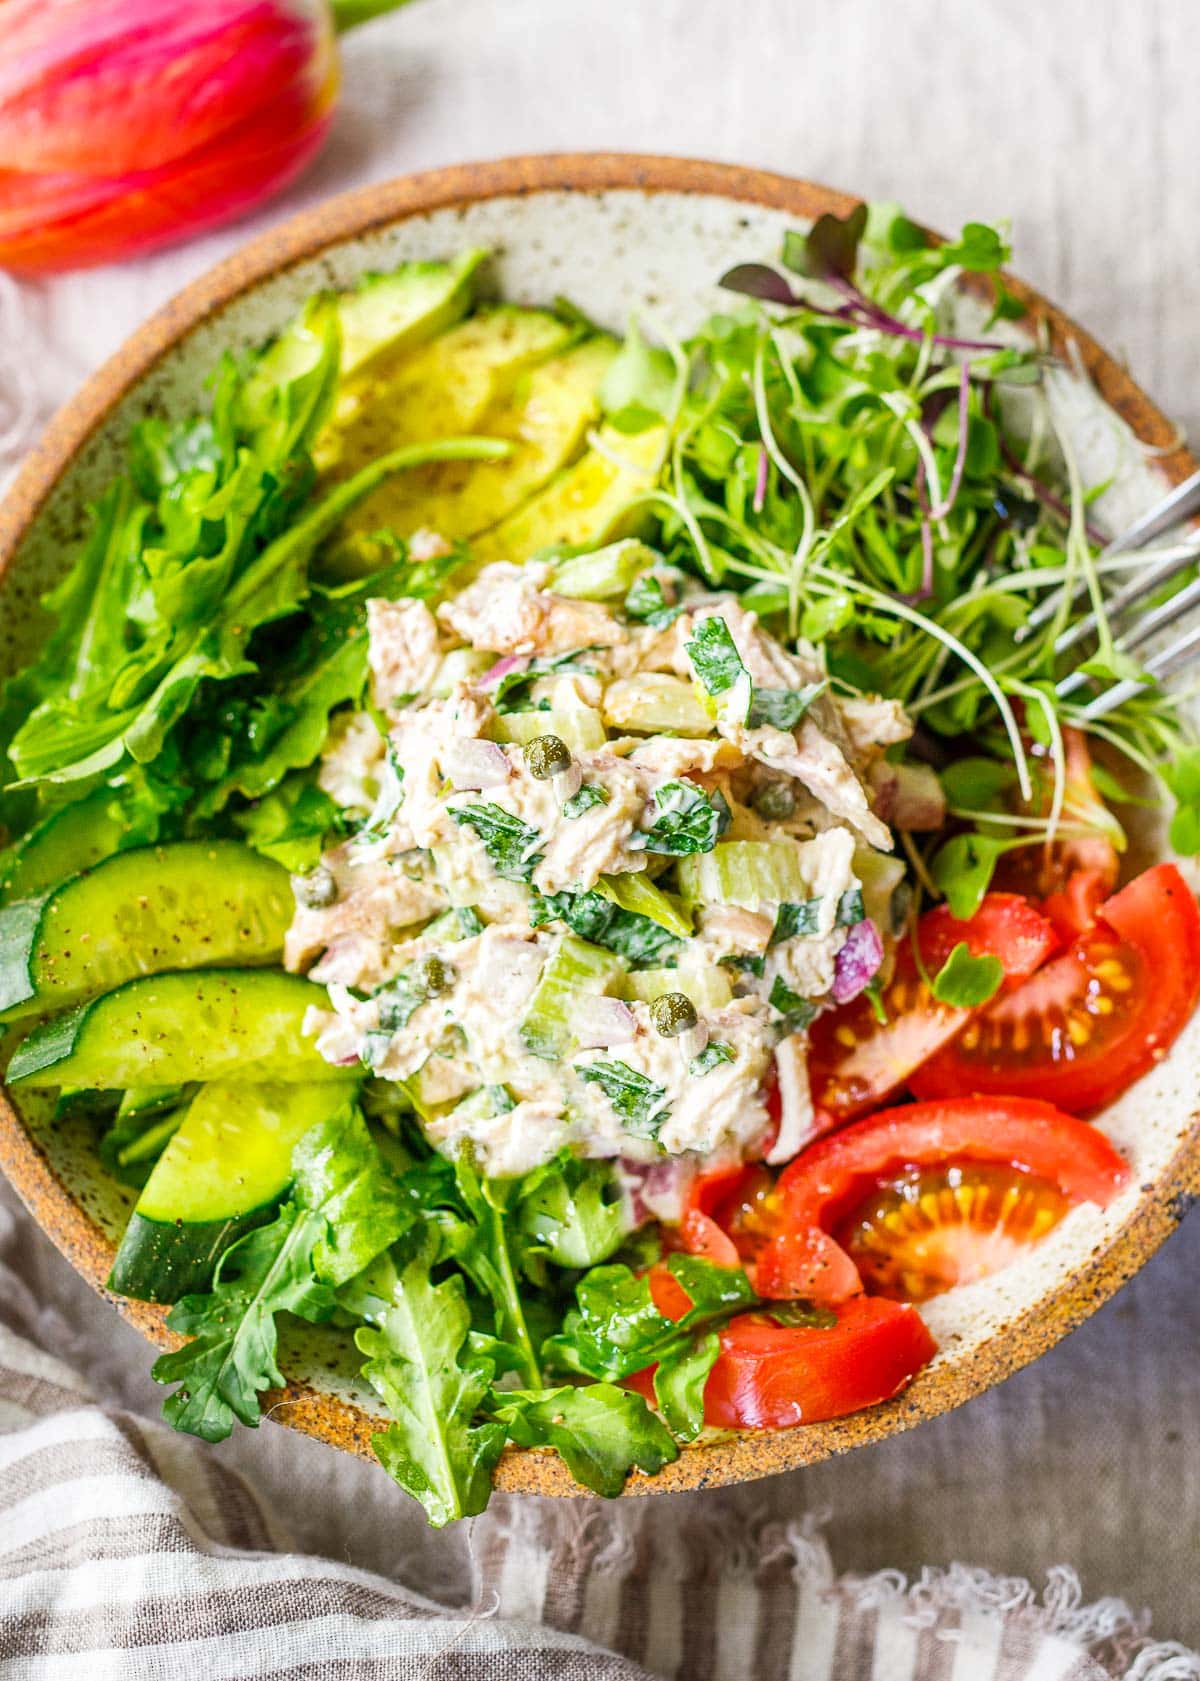 A classic recipe for Chicken Salad that is easy to make and full of flavor!  Make it with leftover chicken- a tasty way to repurpose it into a different meal!